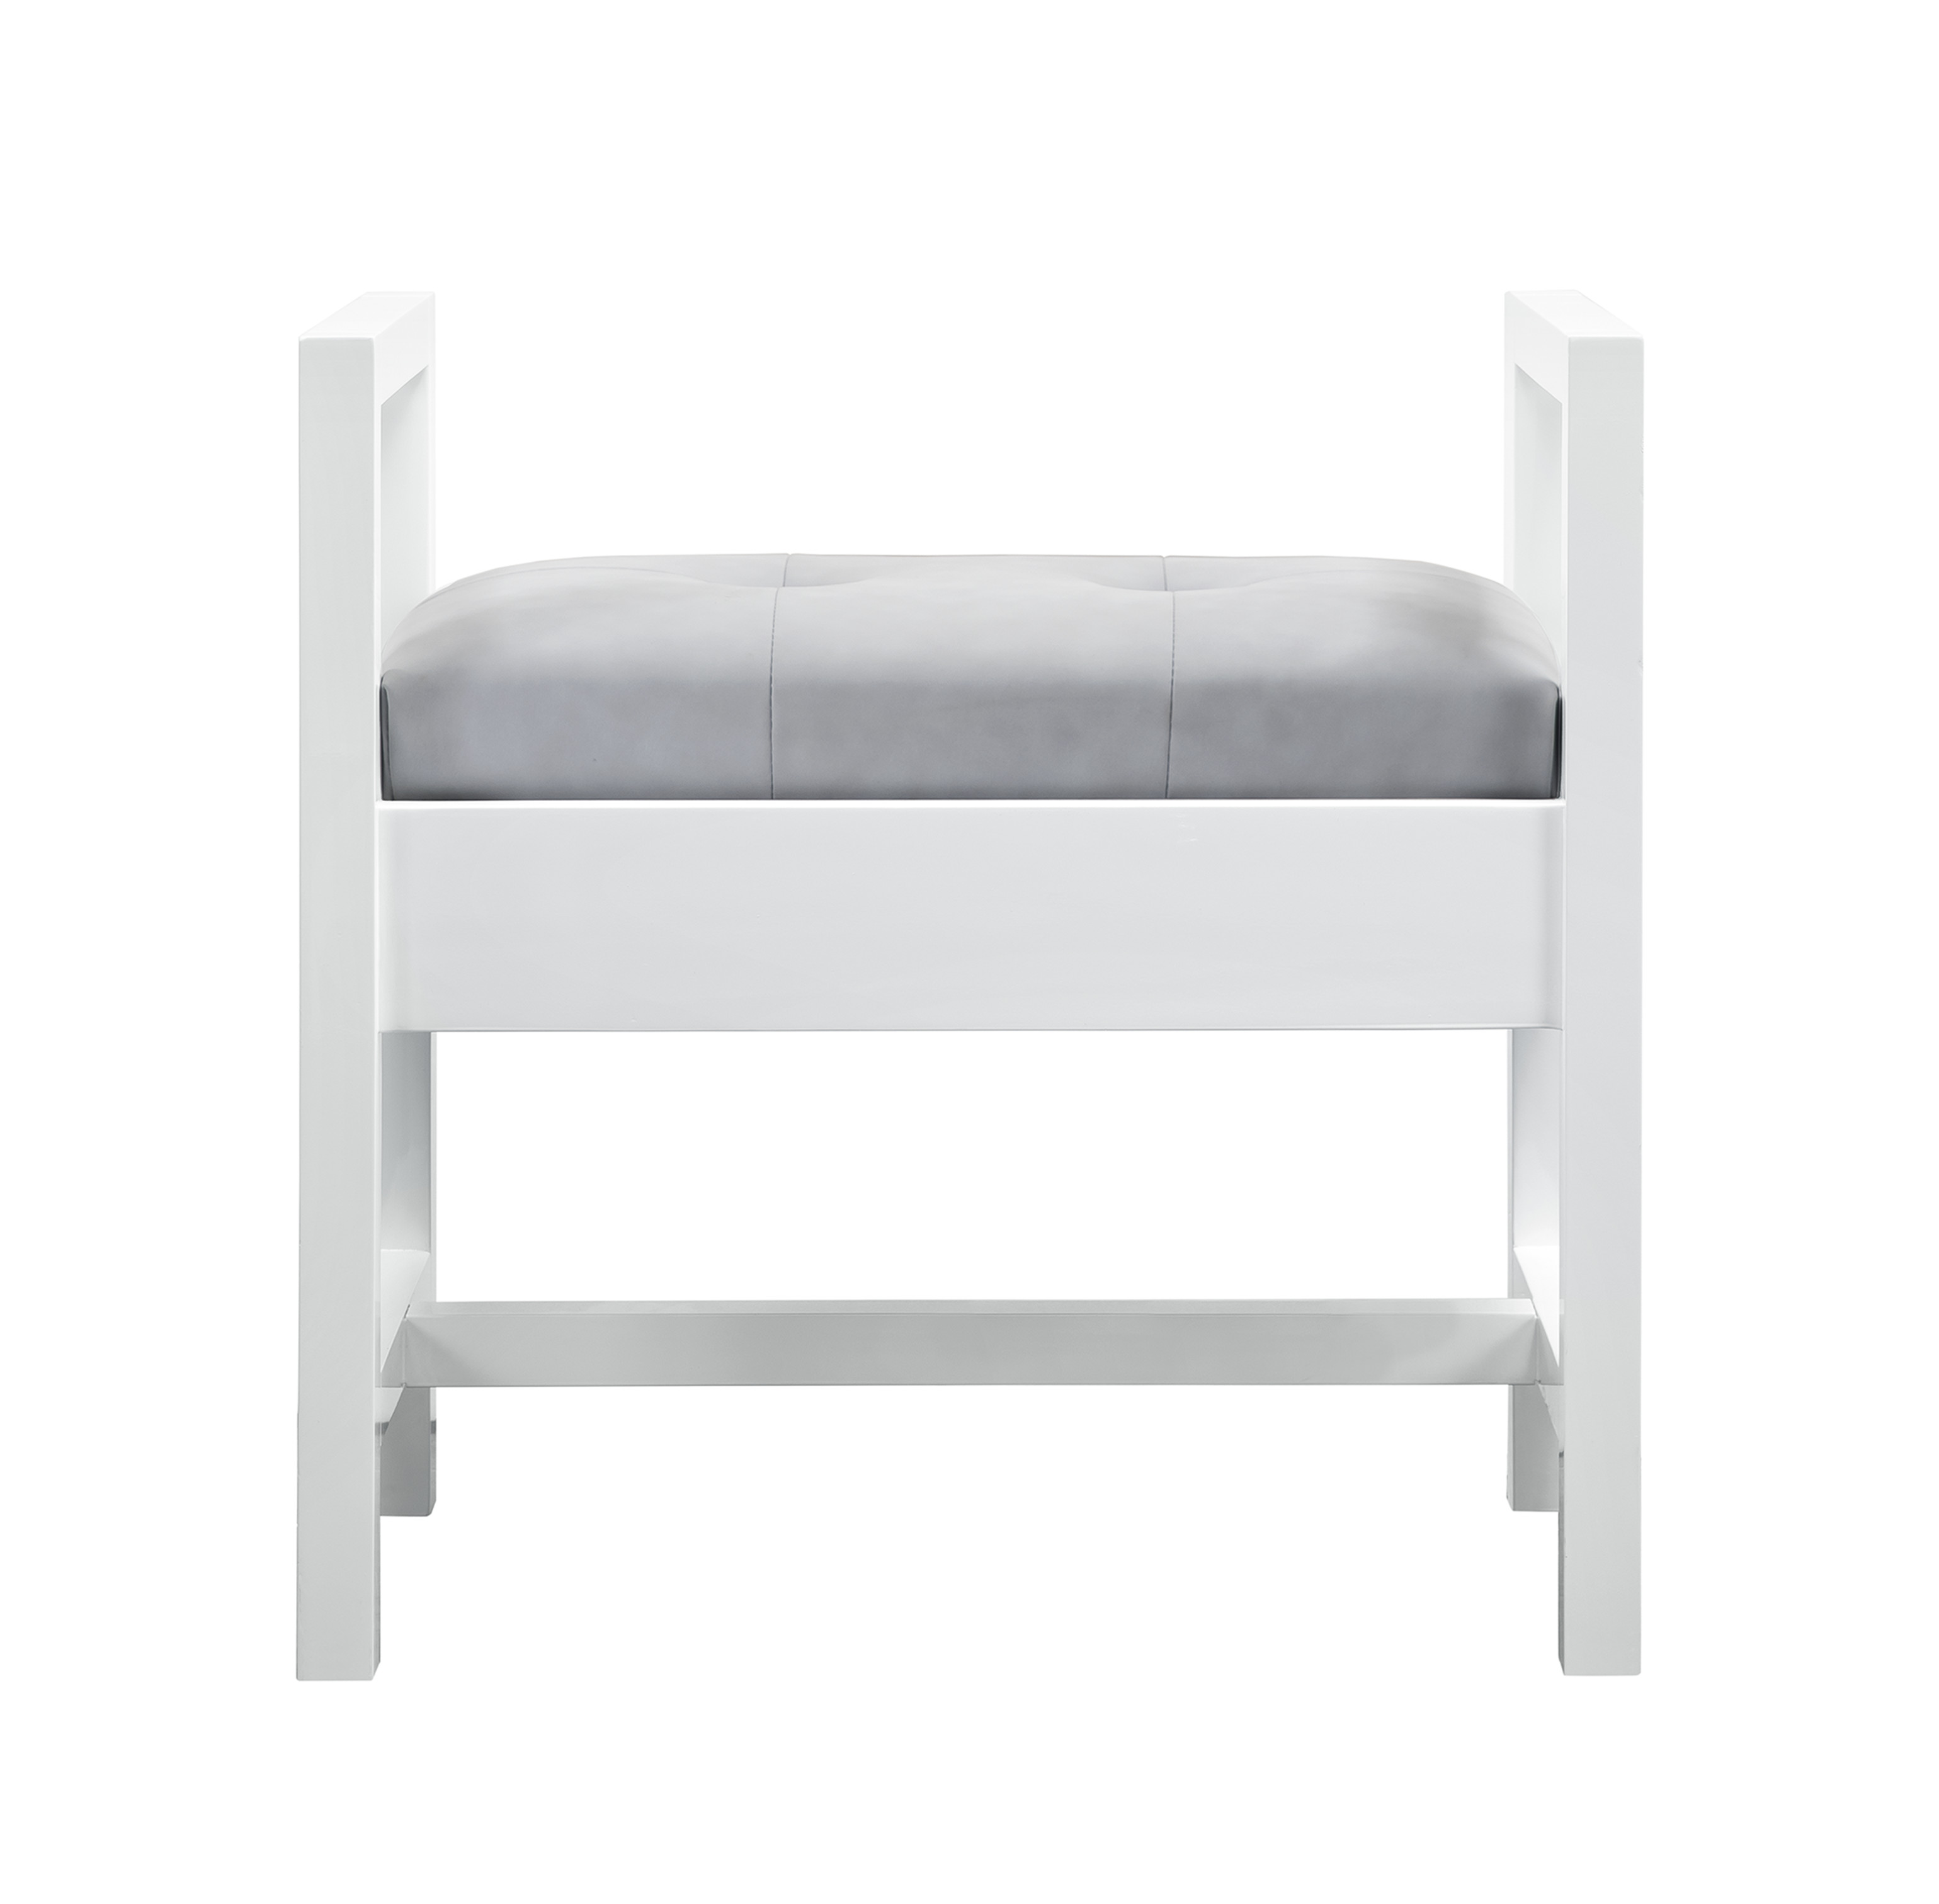 James Martin E444-BNCH-GW Addison 24.5" Upholsted Bench, Glossy White